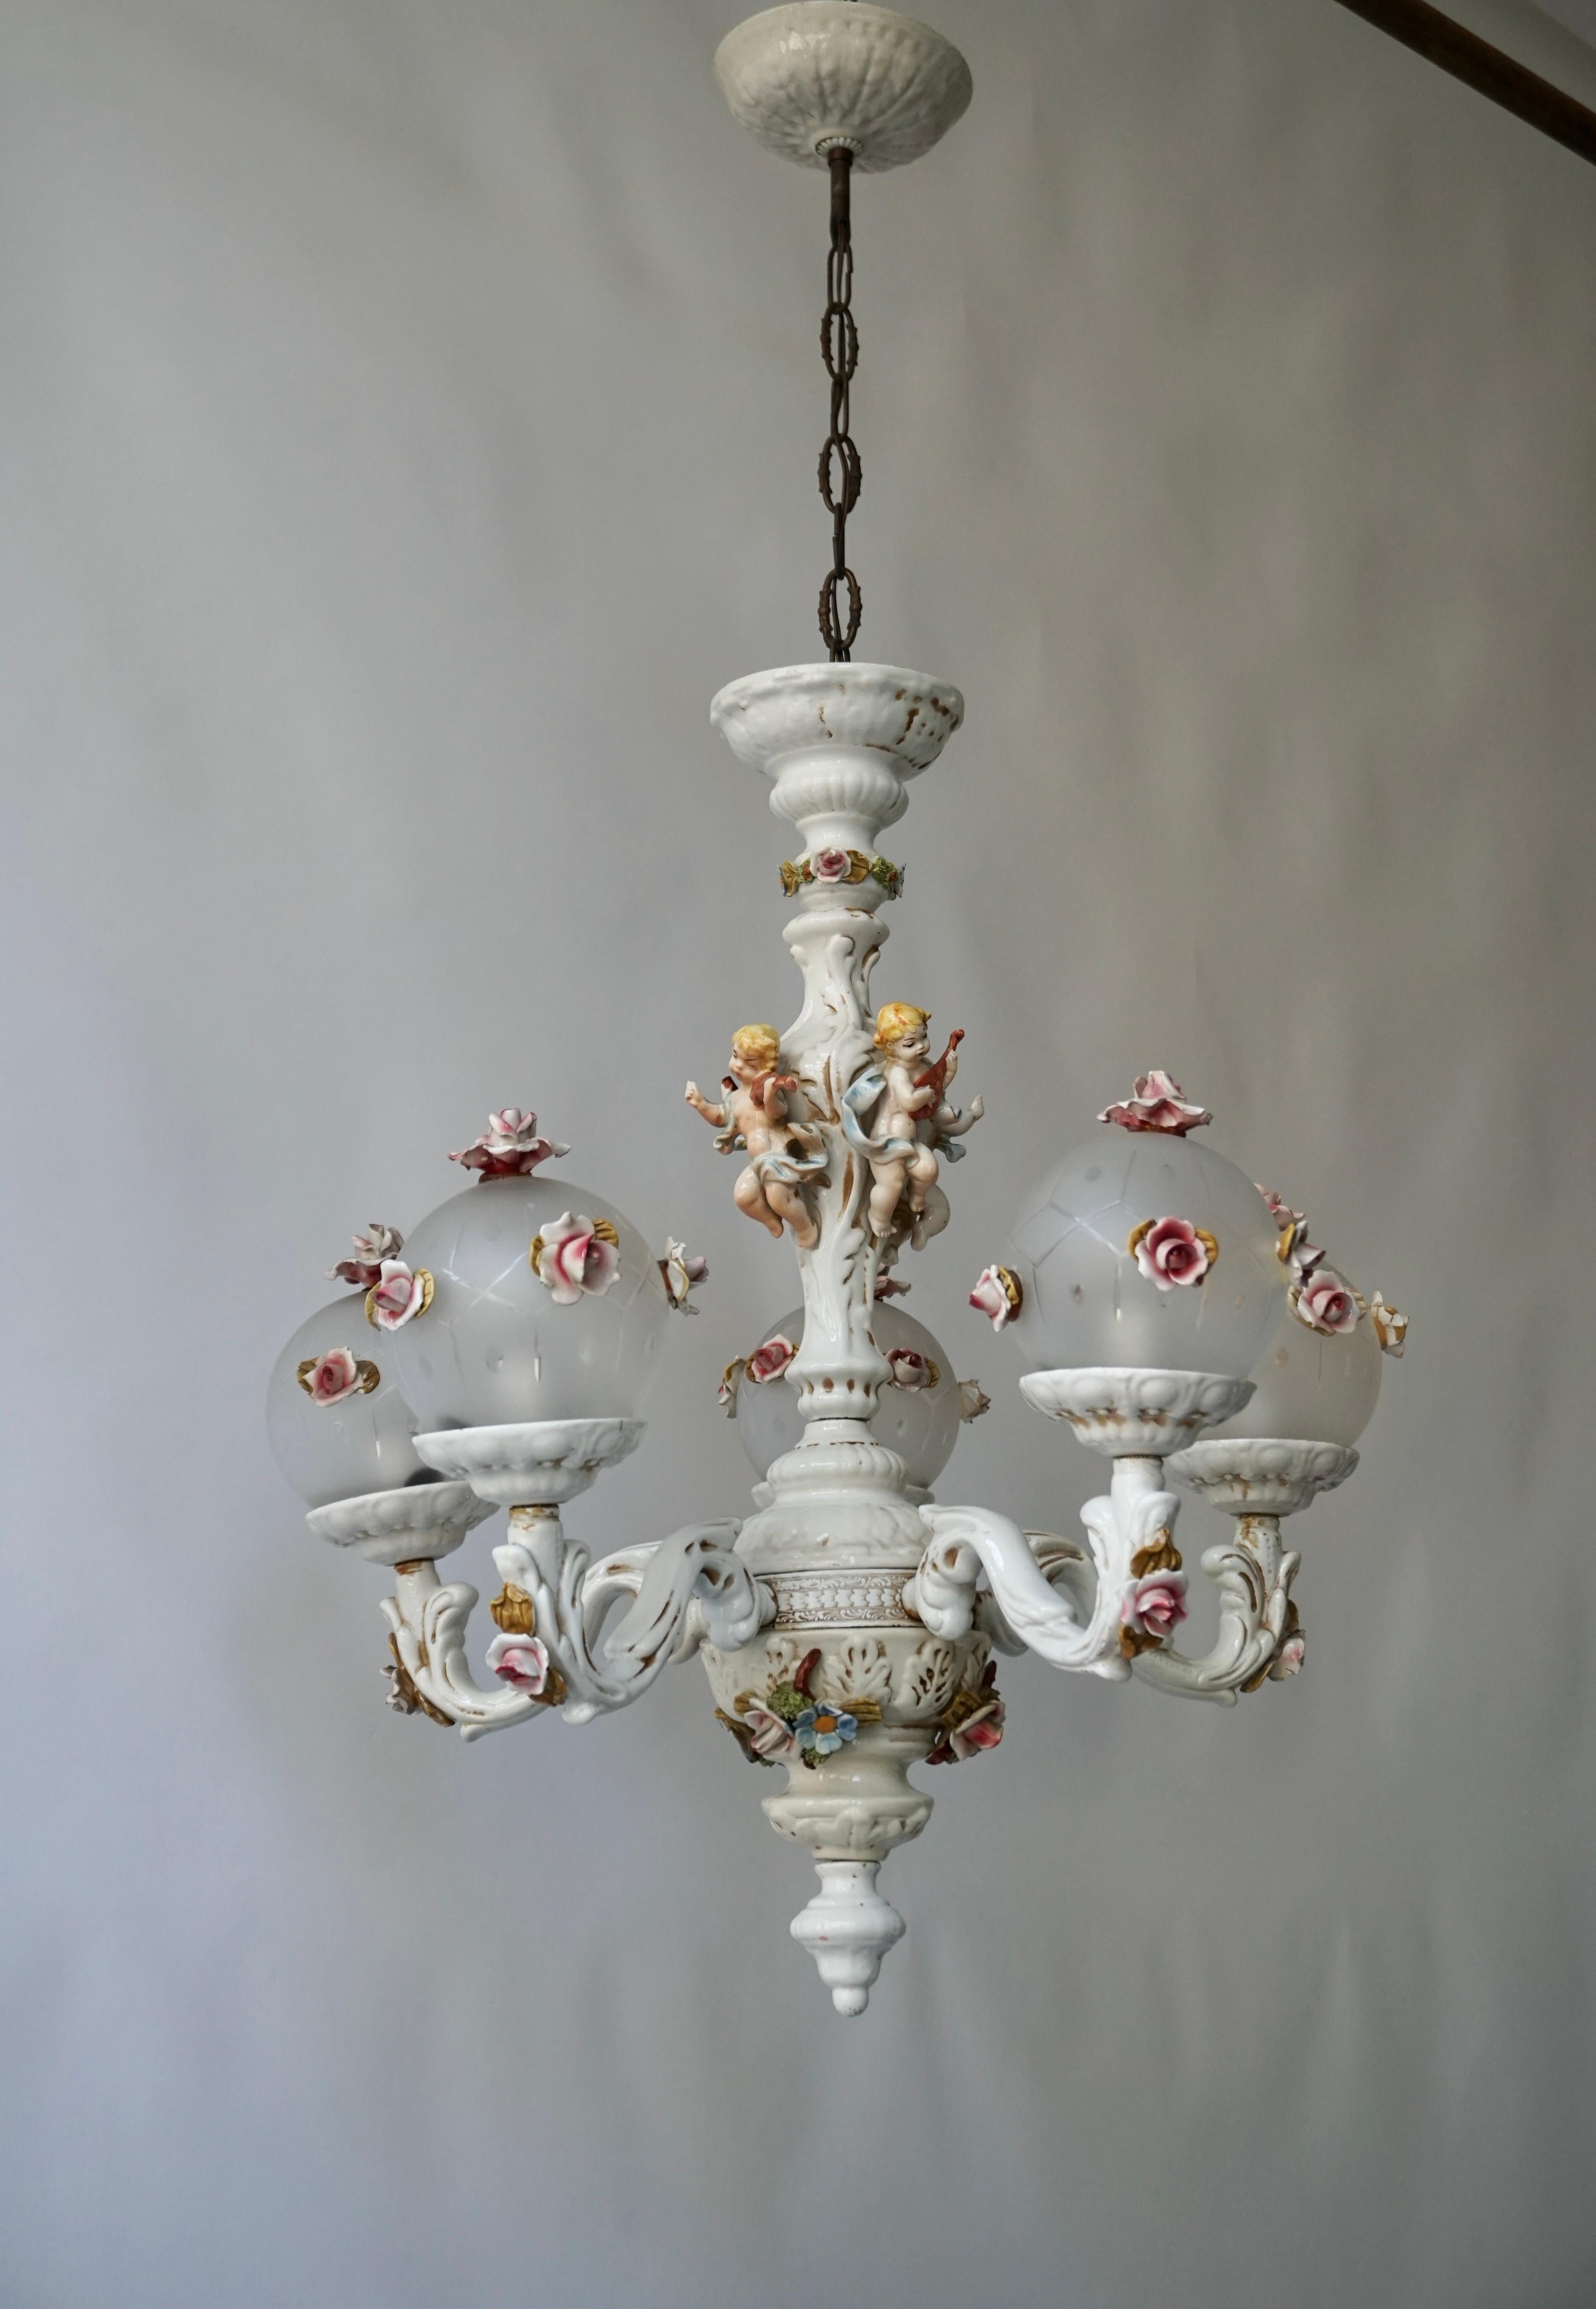 Hollywood Regency Rococo Style Porcelain Chandelier with Cherubs Playing Instruments For Sale